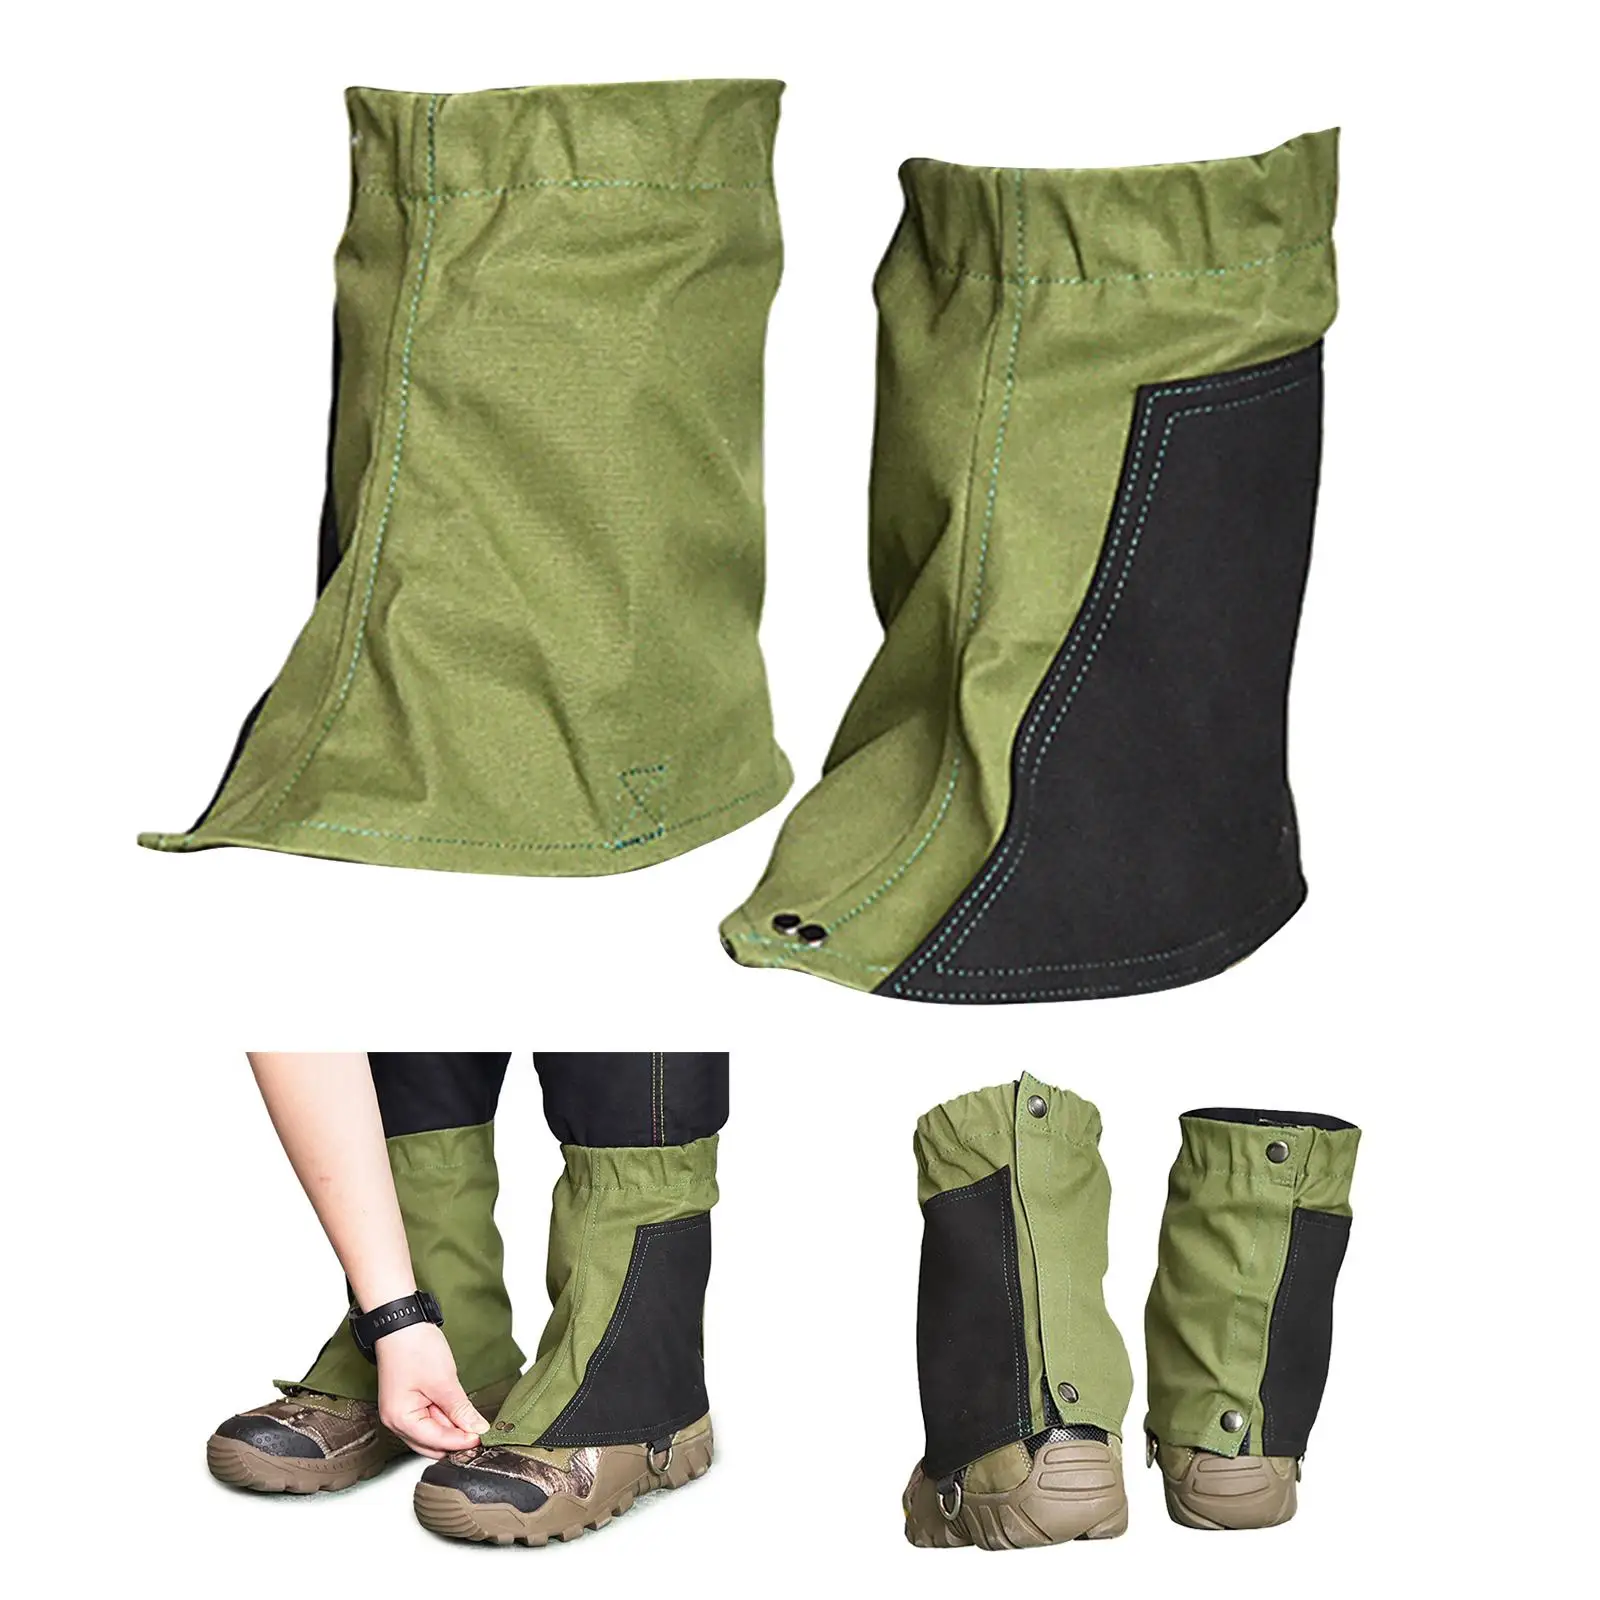    for Hiking and  Snake Bite  Guards for Legs with , Adjustable Lightweight Flexible Design fits Men and Women